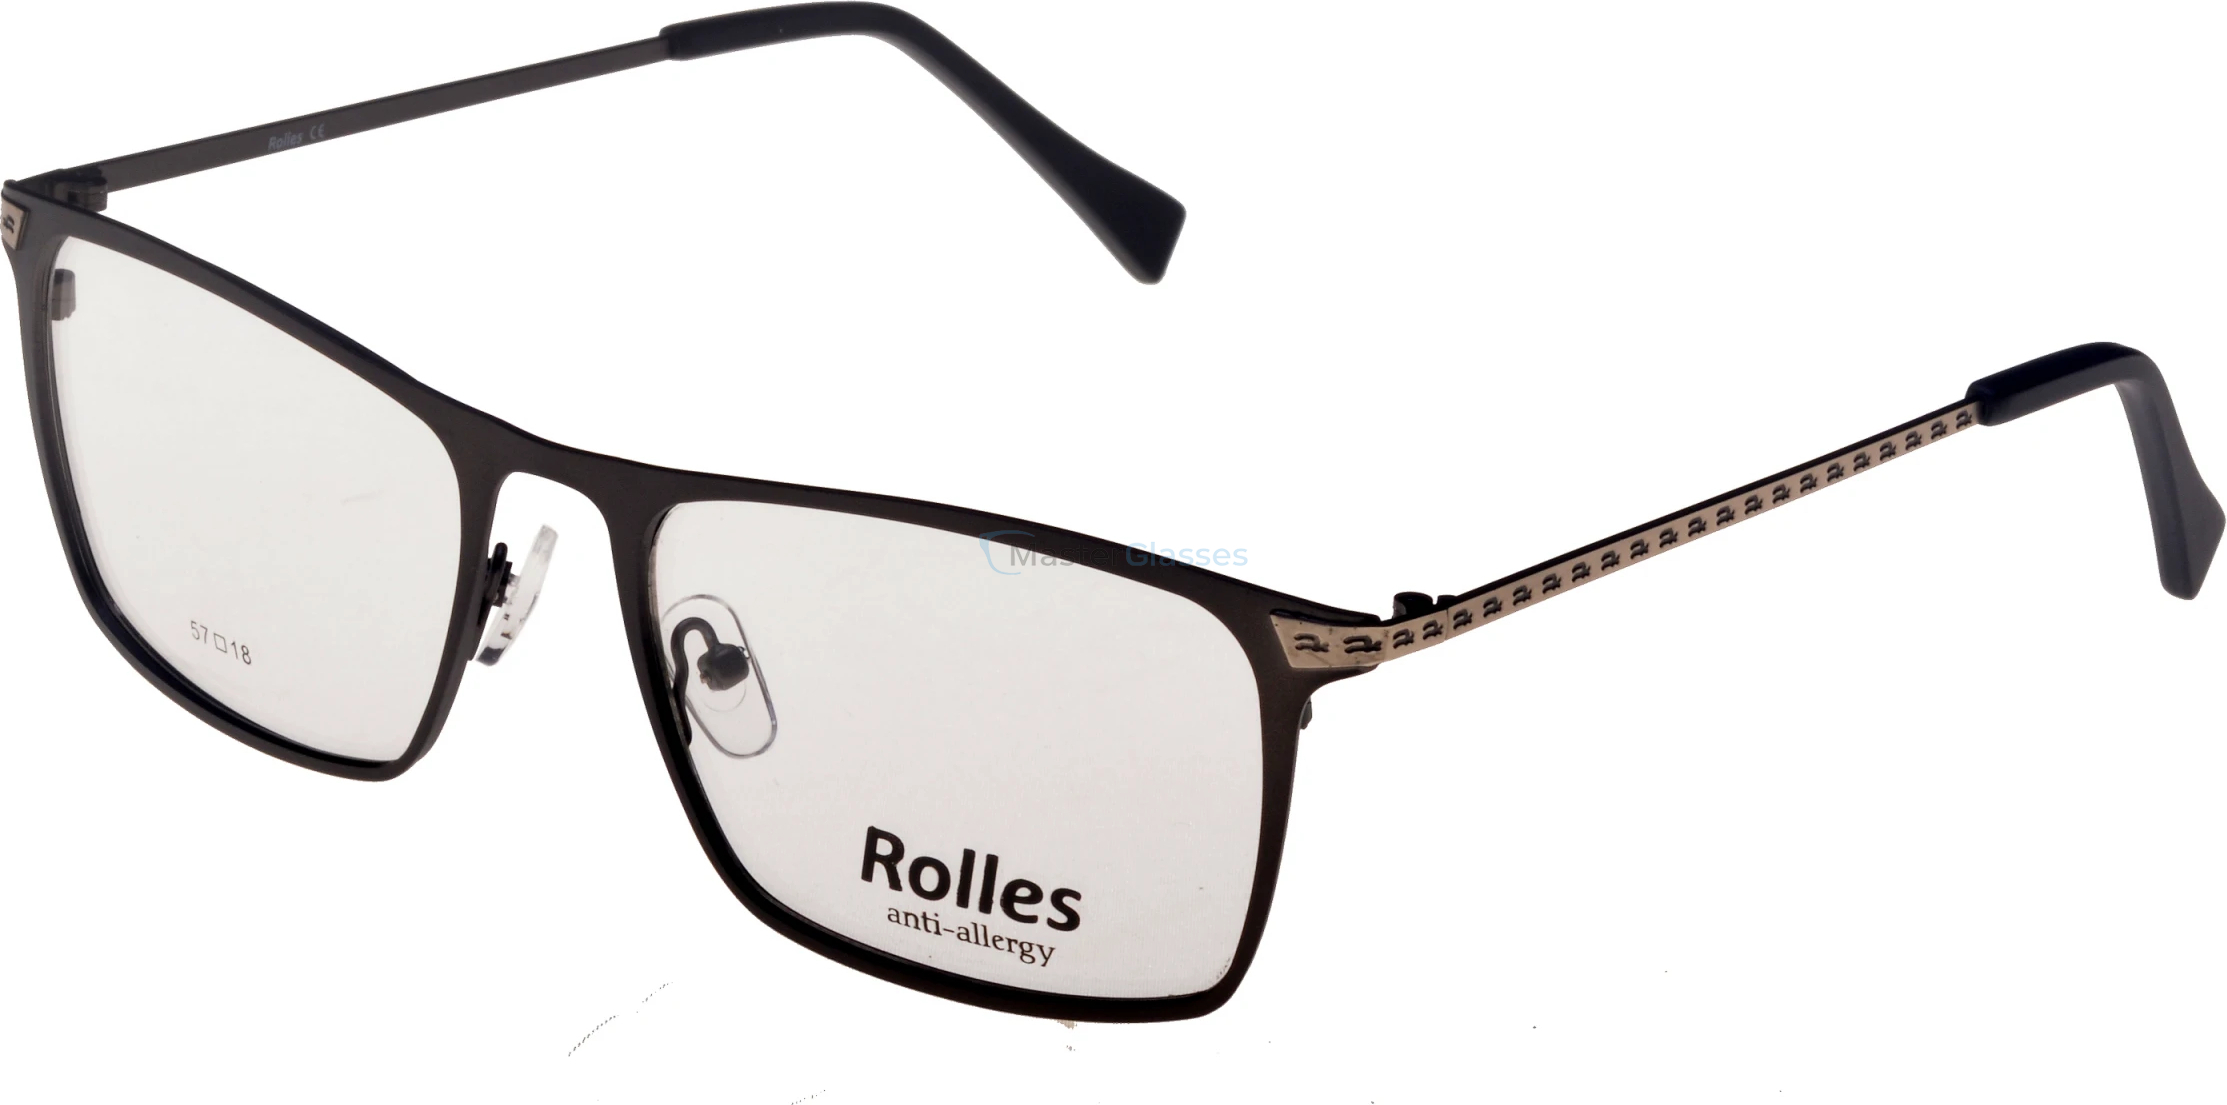  Rolles 703 03